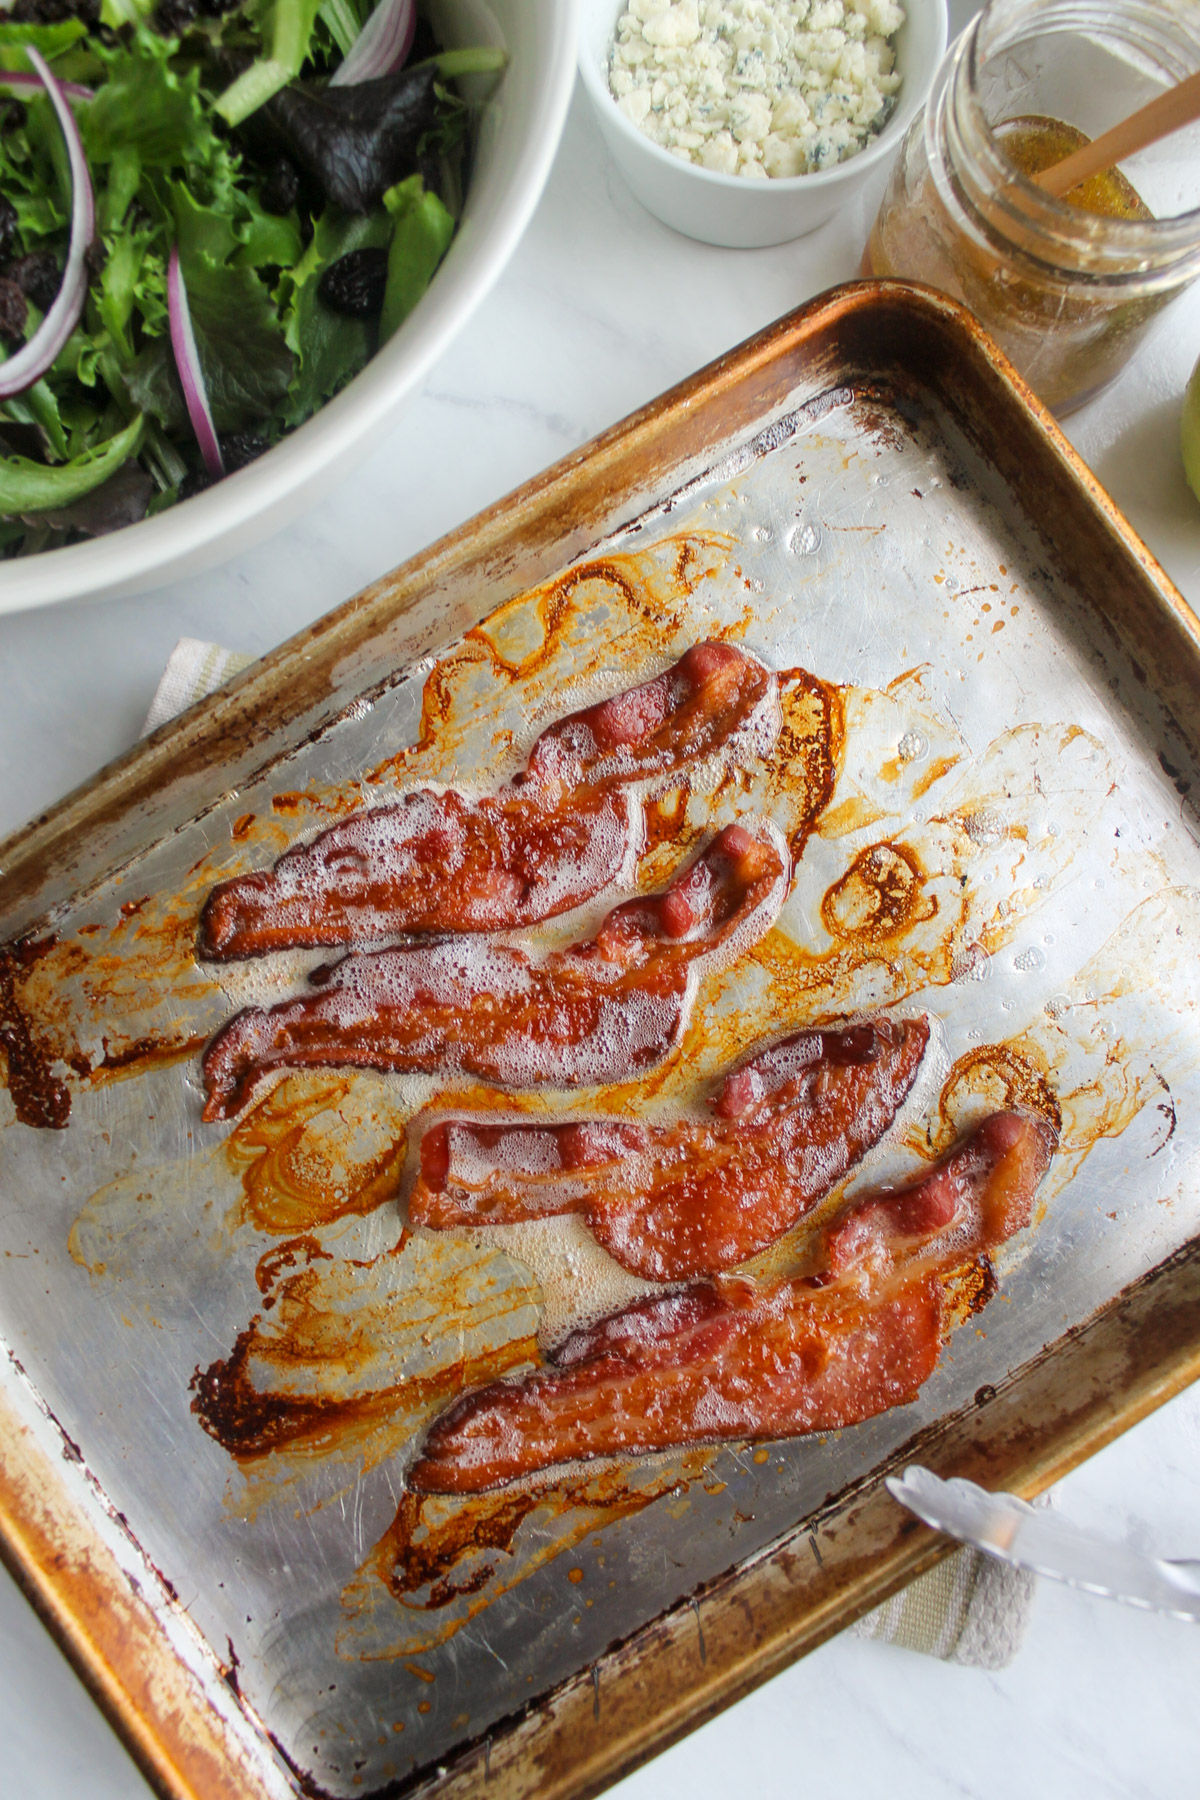 Slices of bacon cooked on a sheet pan.